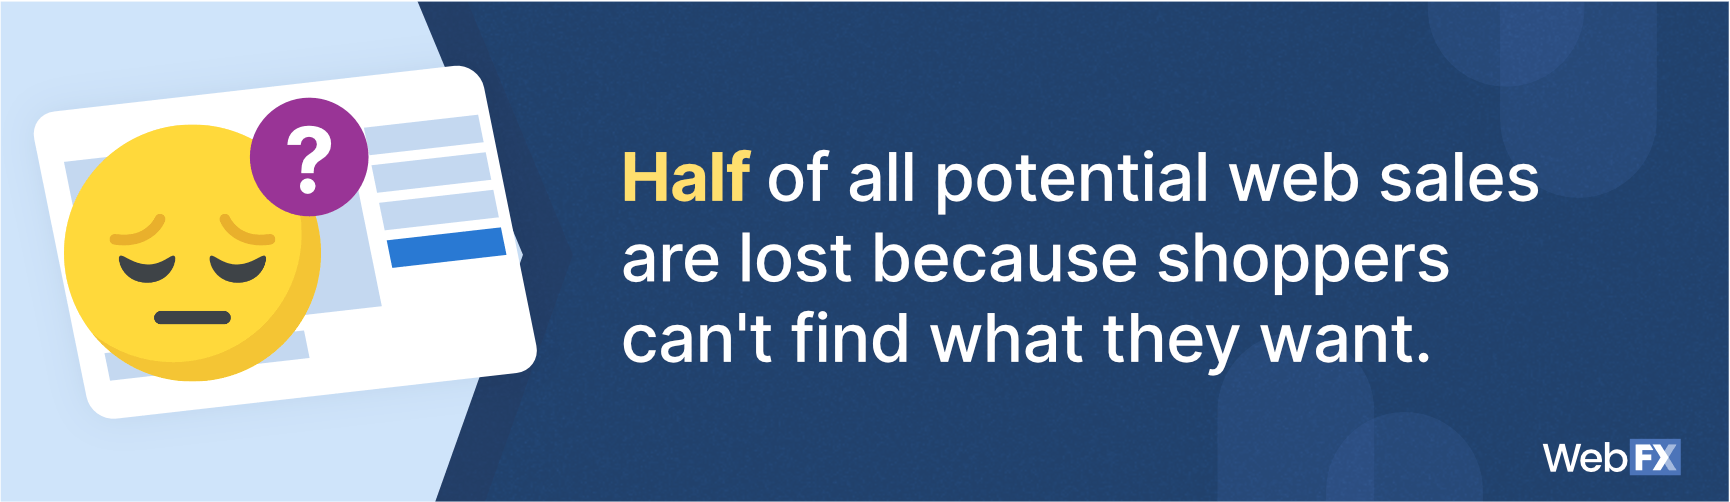 Half of potential web sales get lost because shoppers can't find what they want